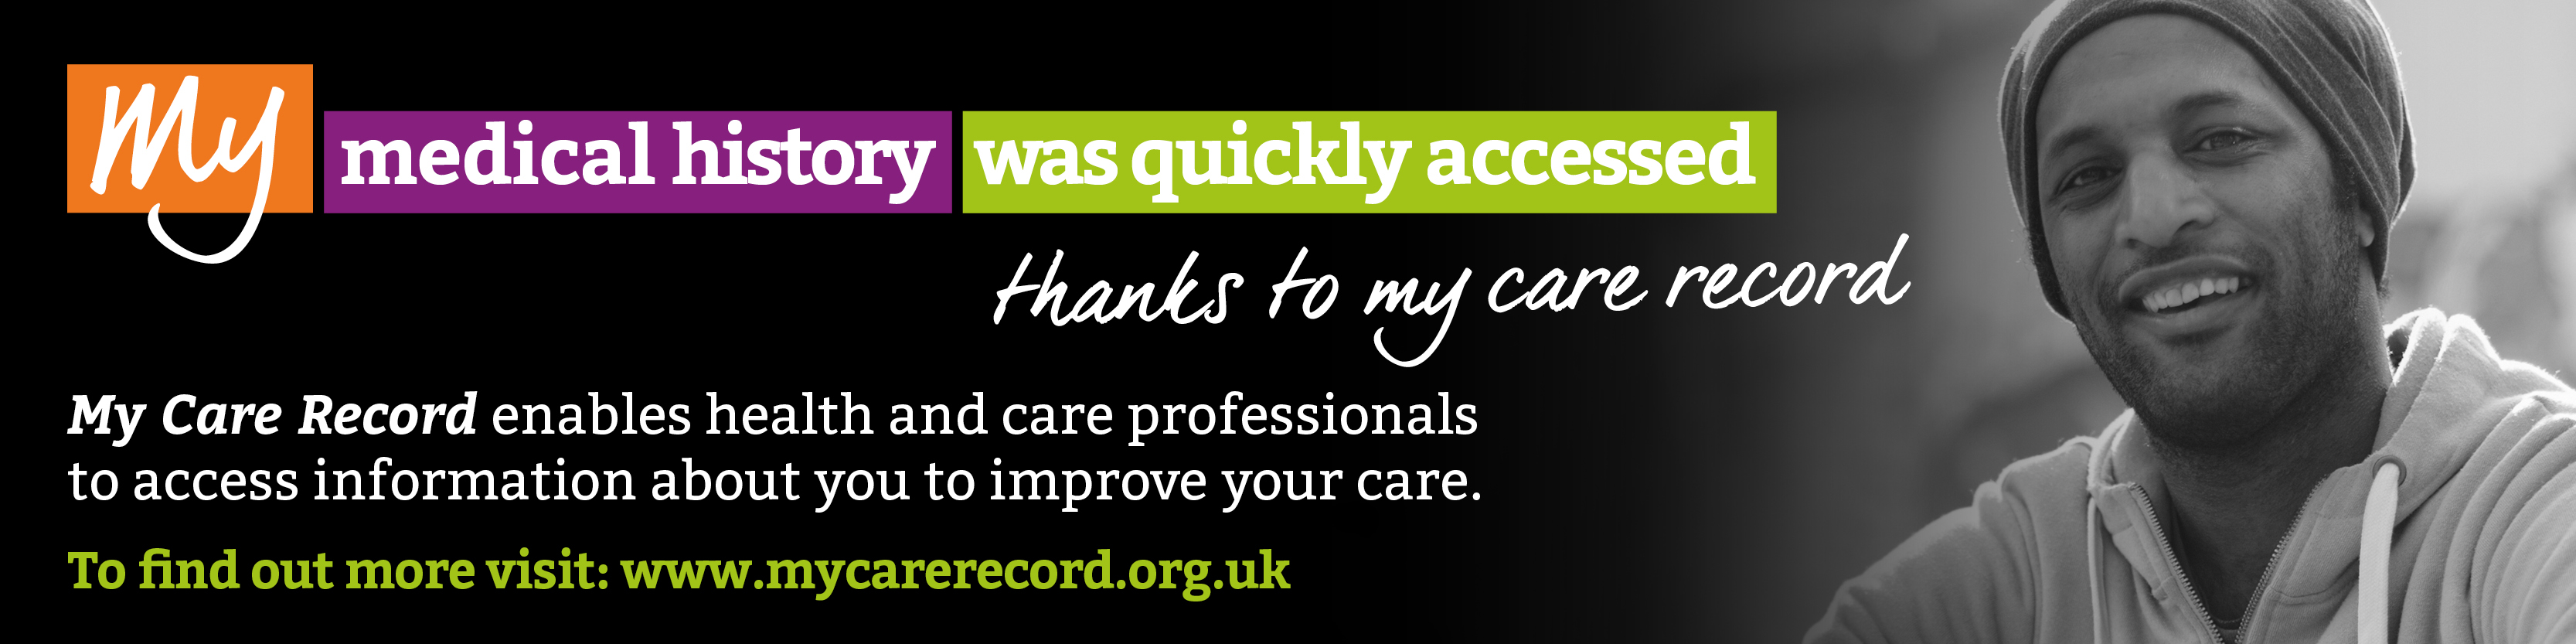 My medical history was quickly accessed thanks to my care record